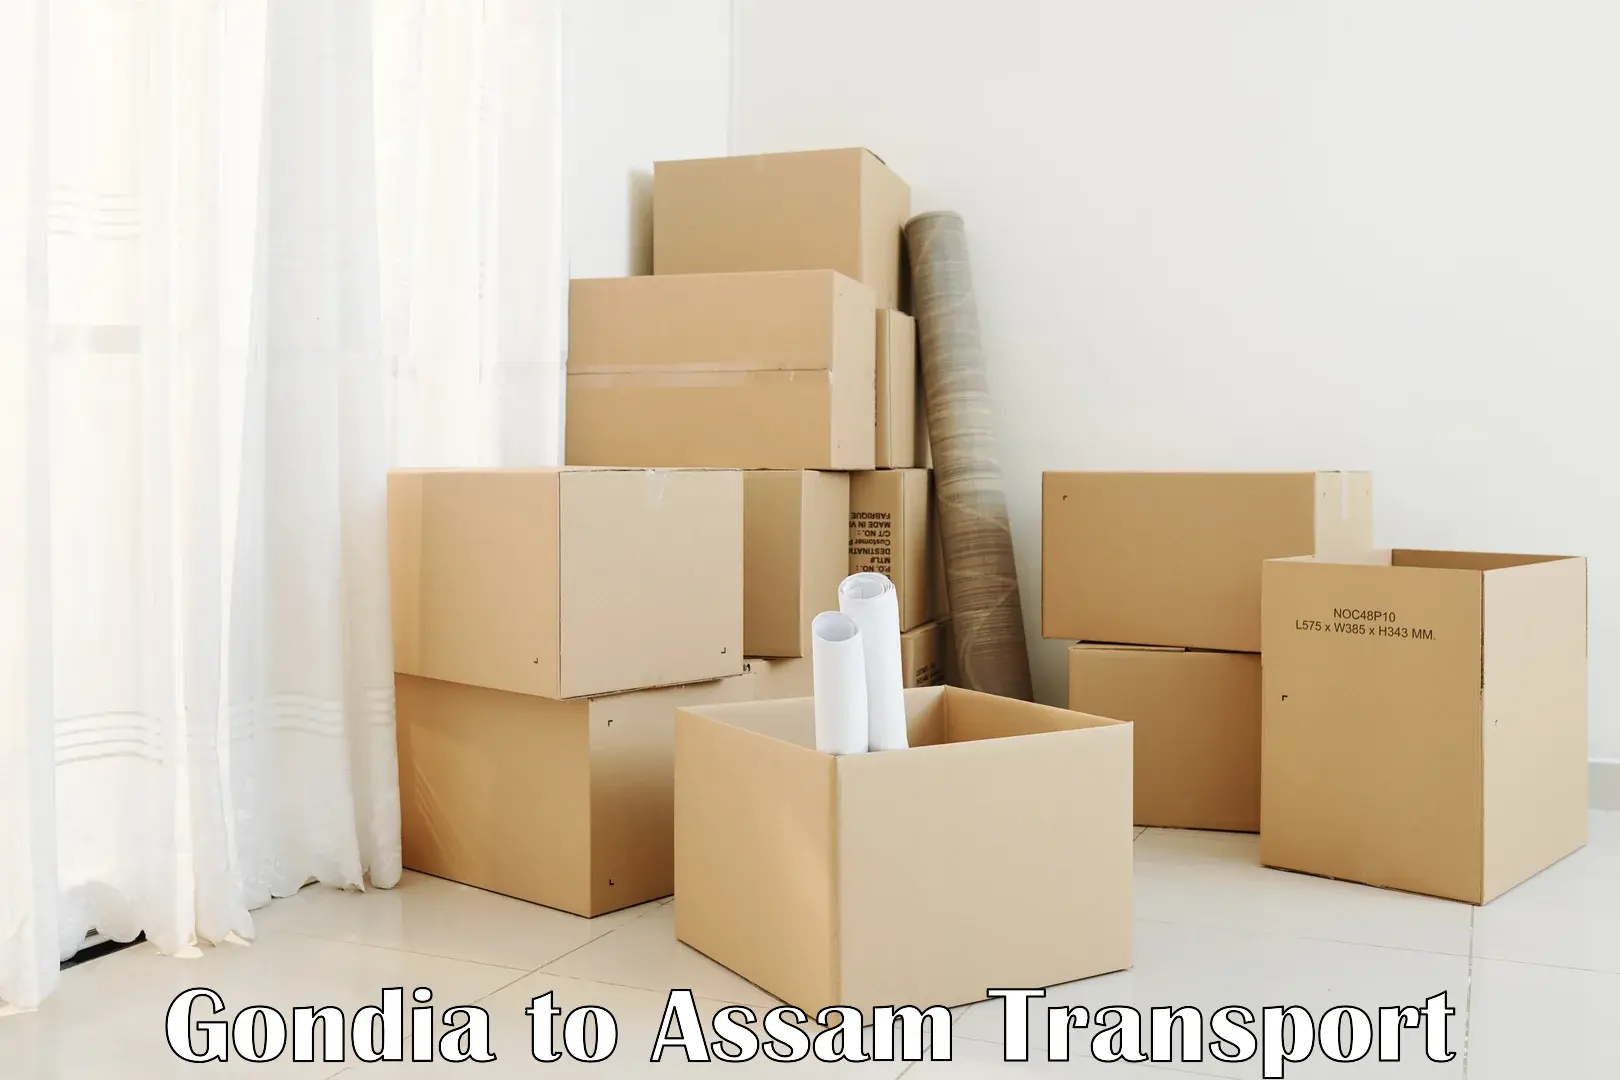 Container transport service Gondia to Sonitpur